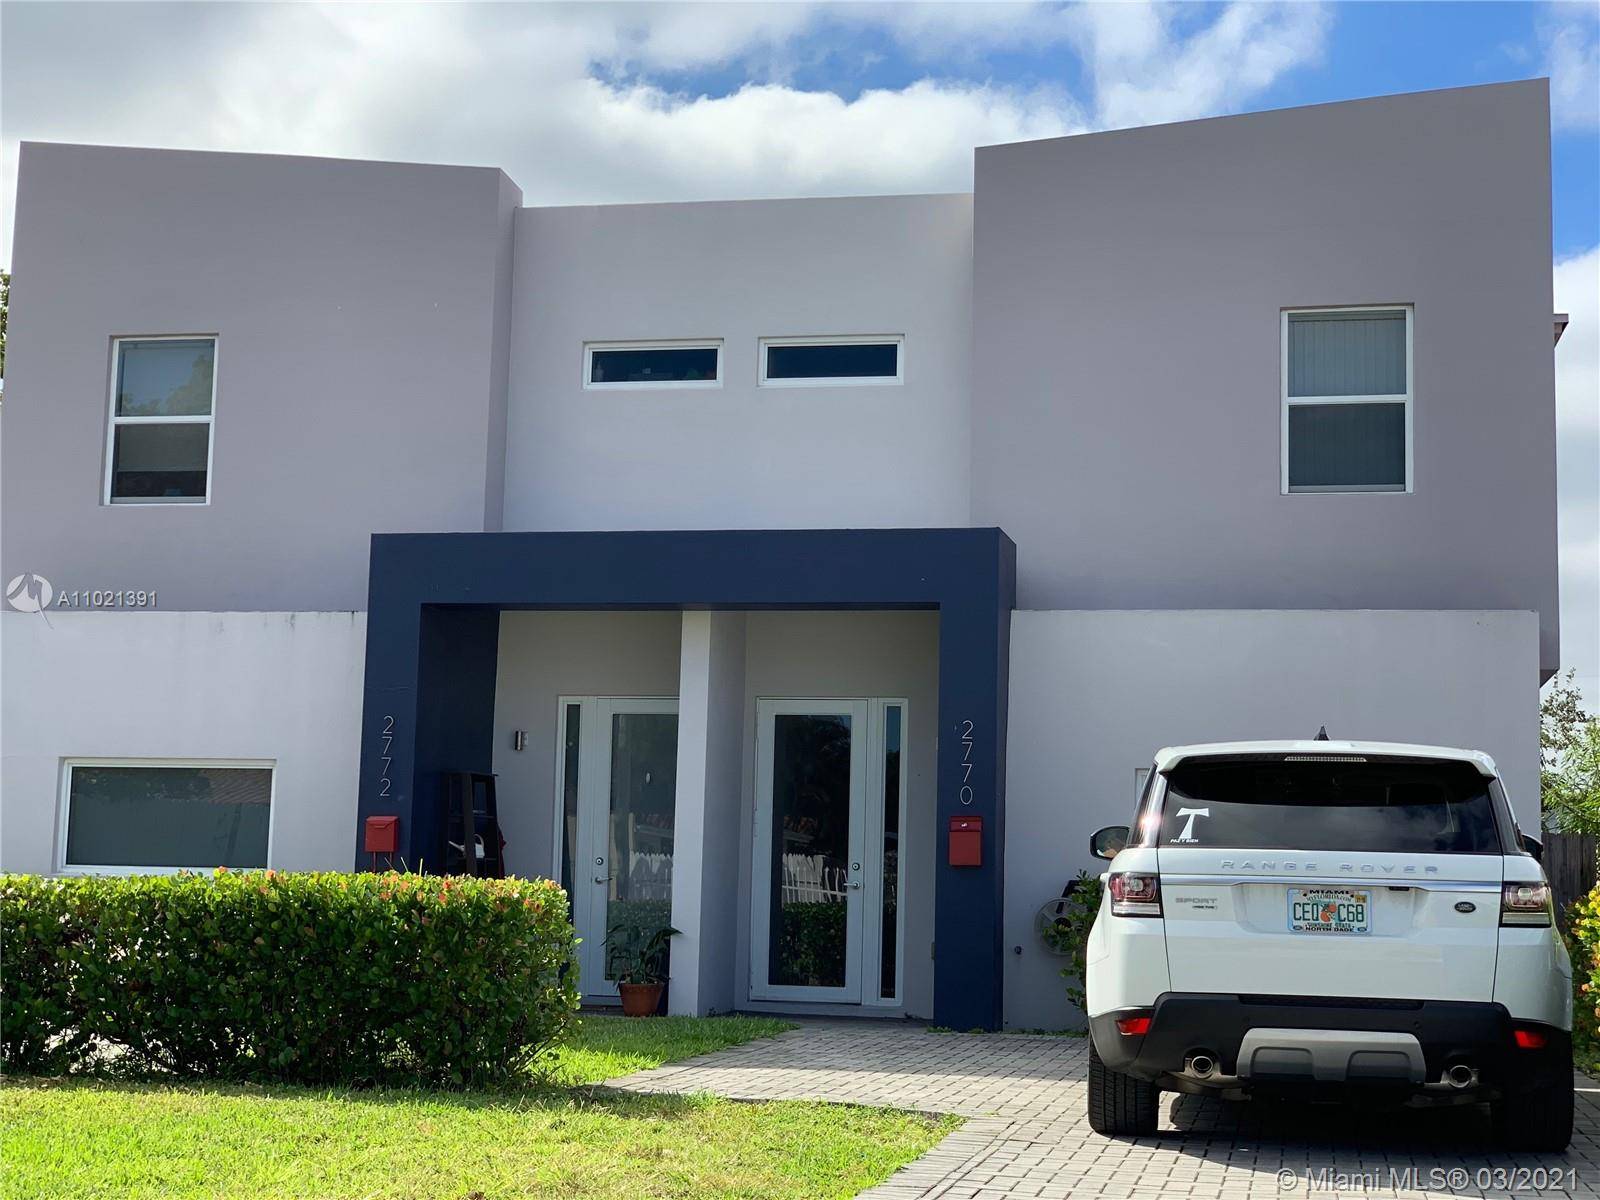 Modern 3 bed and 2. 5 bath townhouse in a very convenient location in the Northeast Coconut Grove, Marble flooring throughout the house.